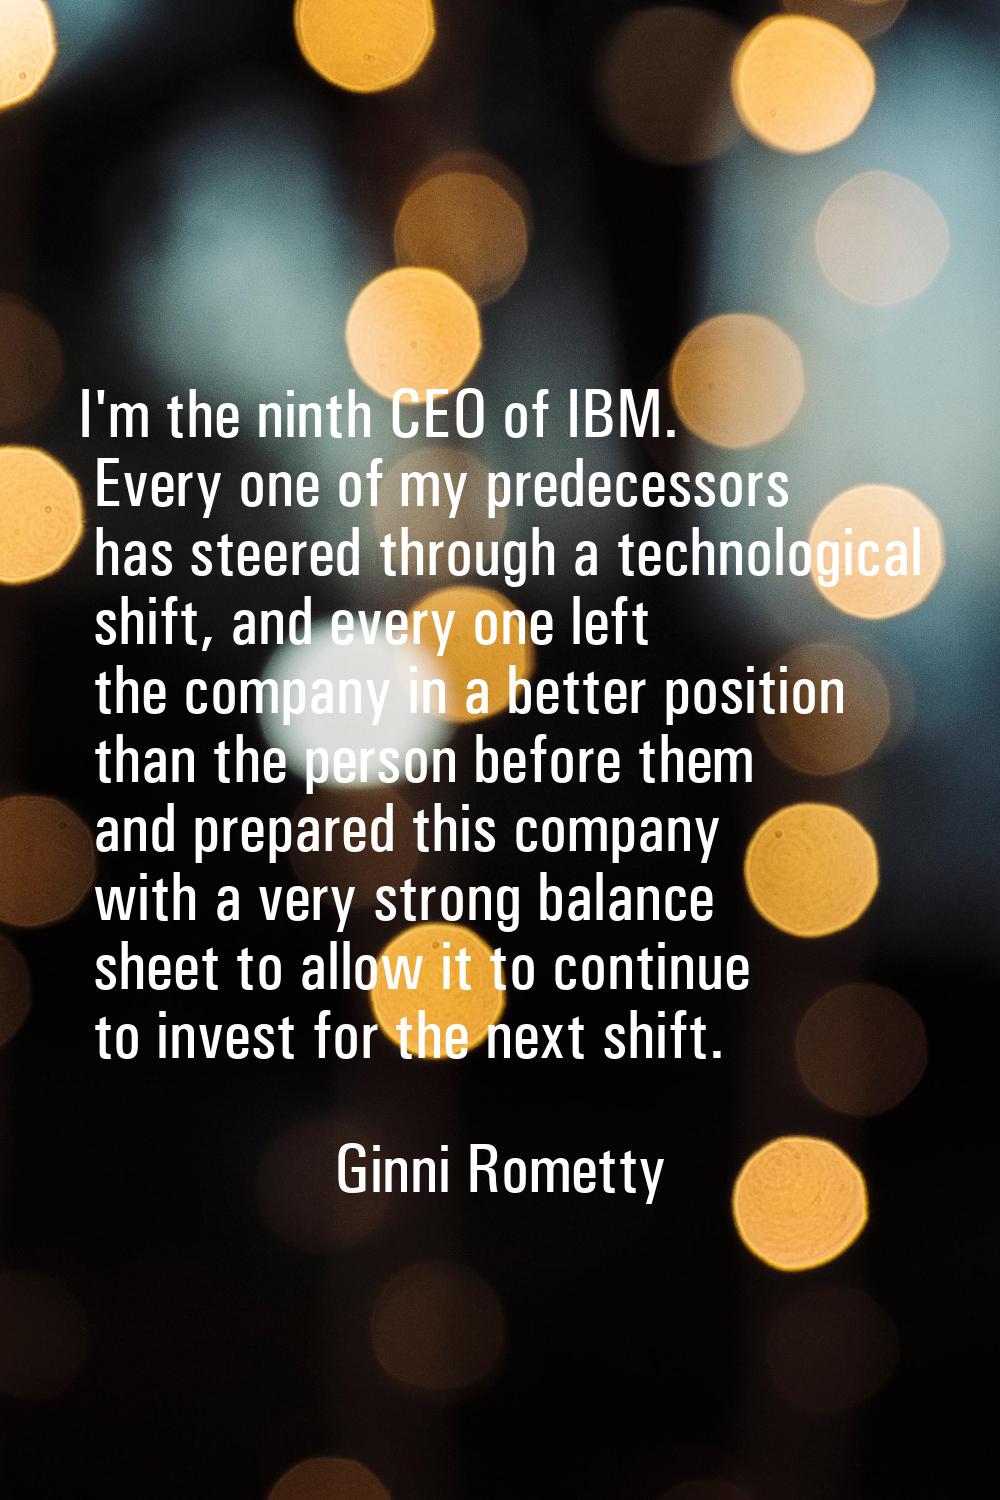 I'm the ninth CEO of IBM. Every one of my predecessors has steered through a technological shift, a